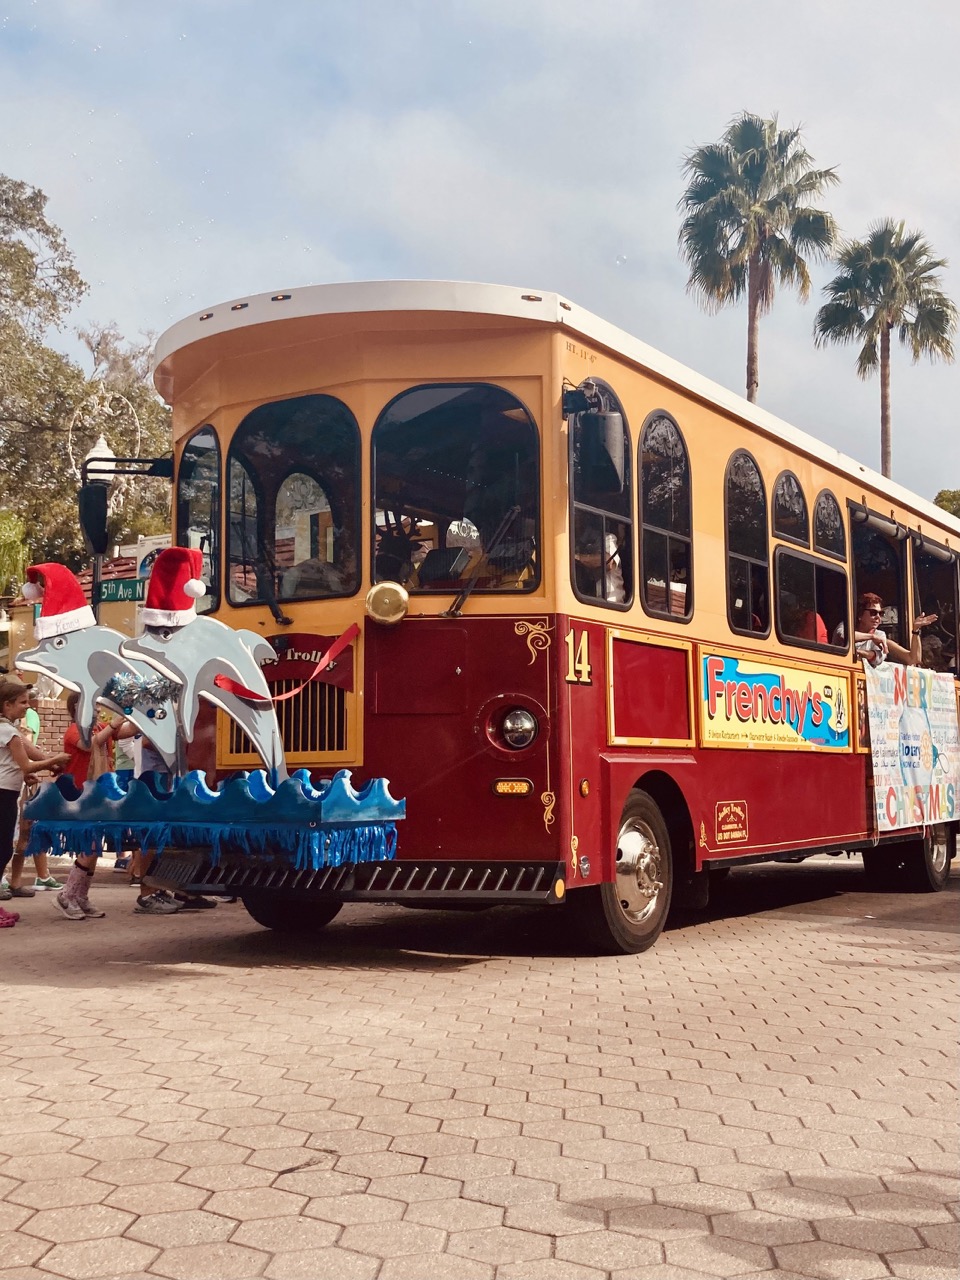 Jolly Trolley with two dolphin decorations coming off the front